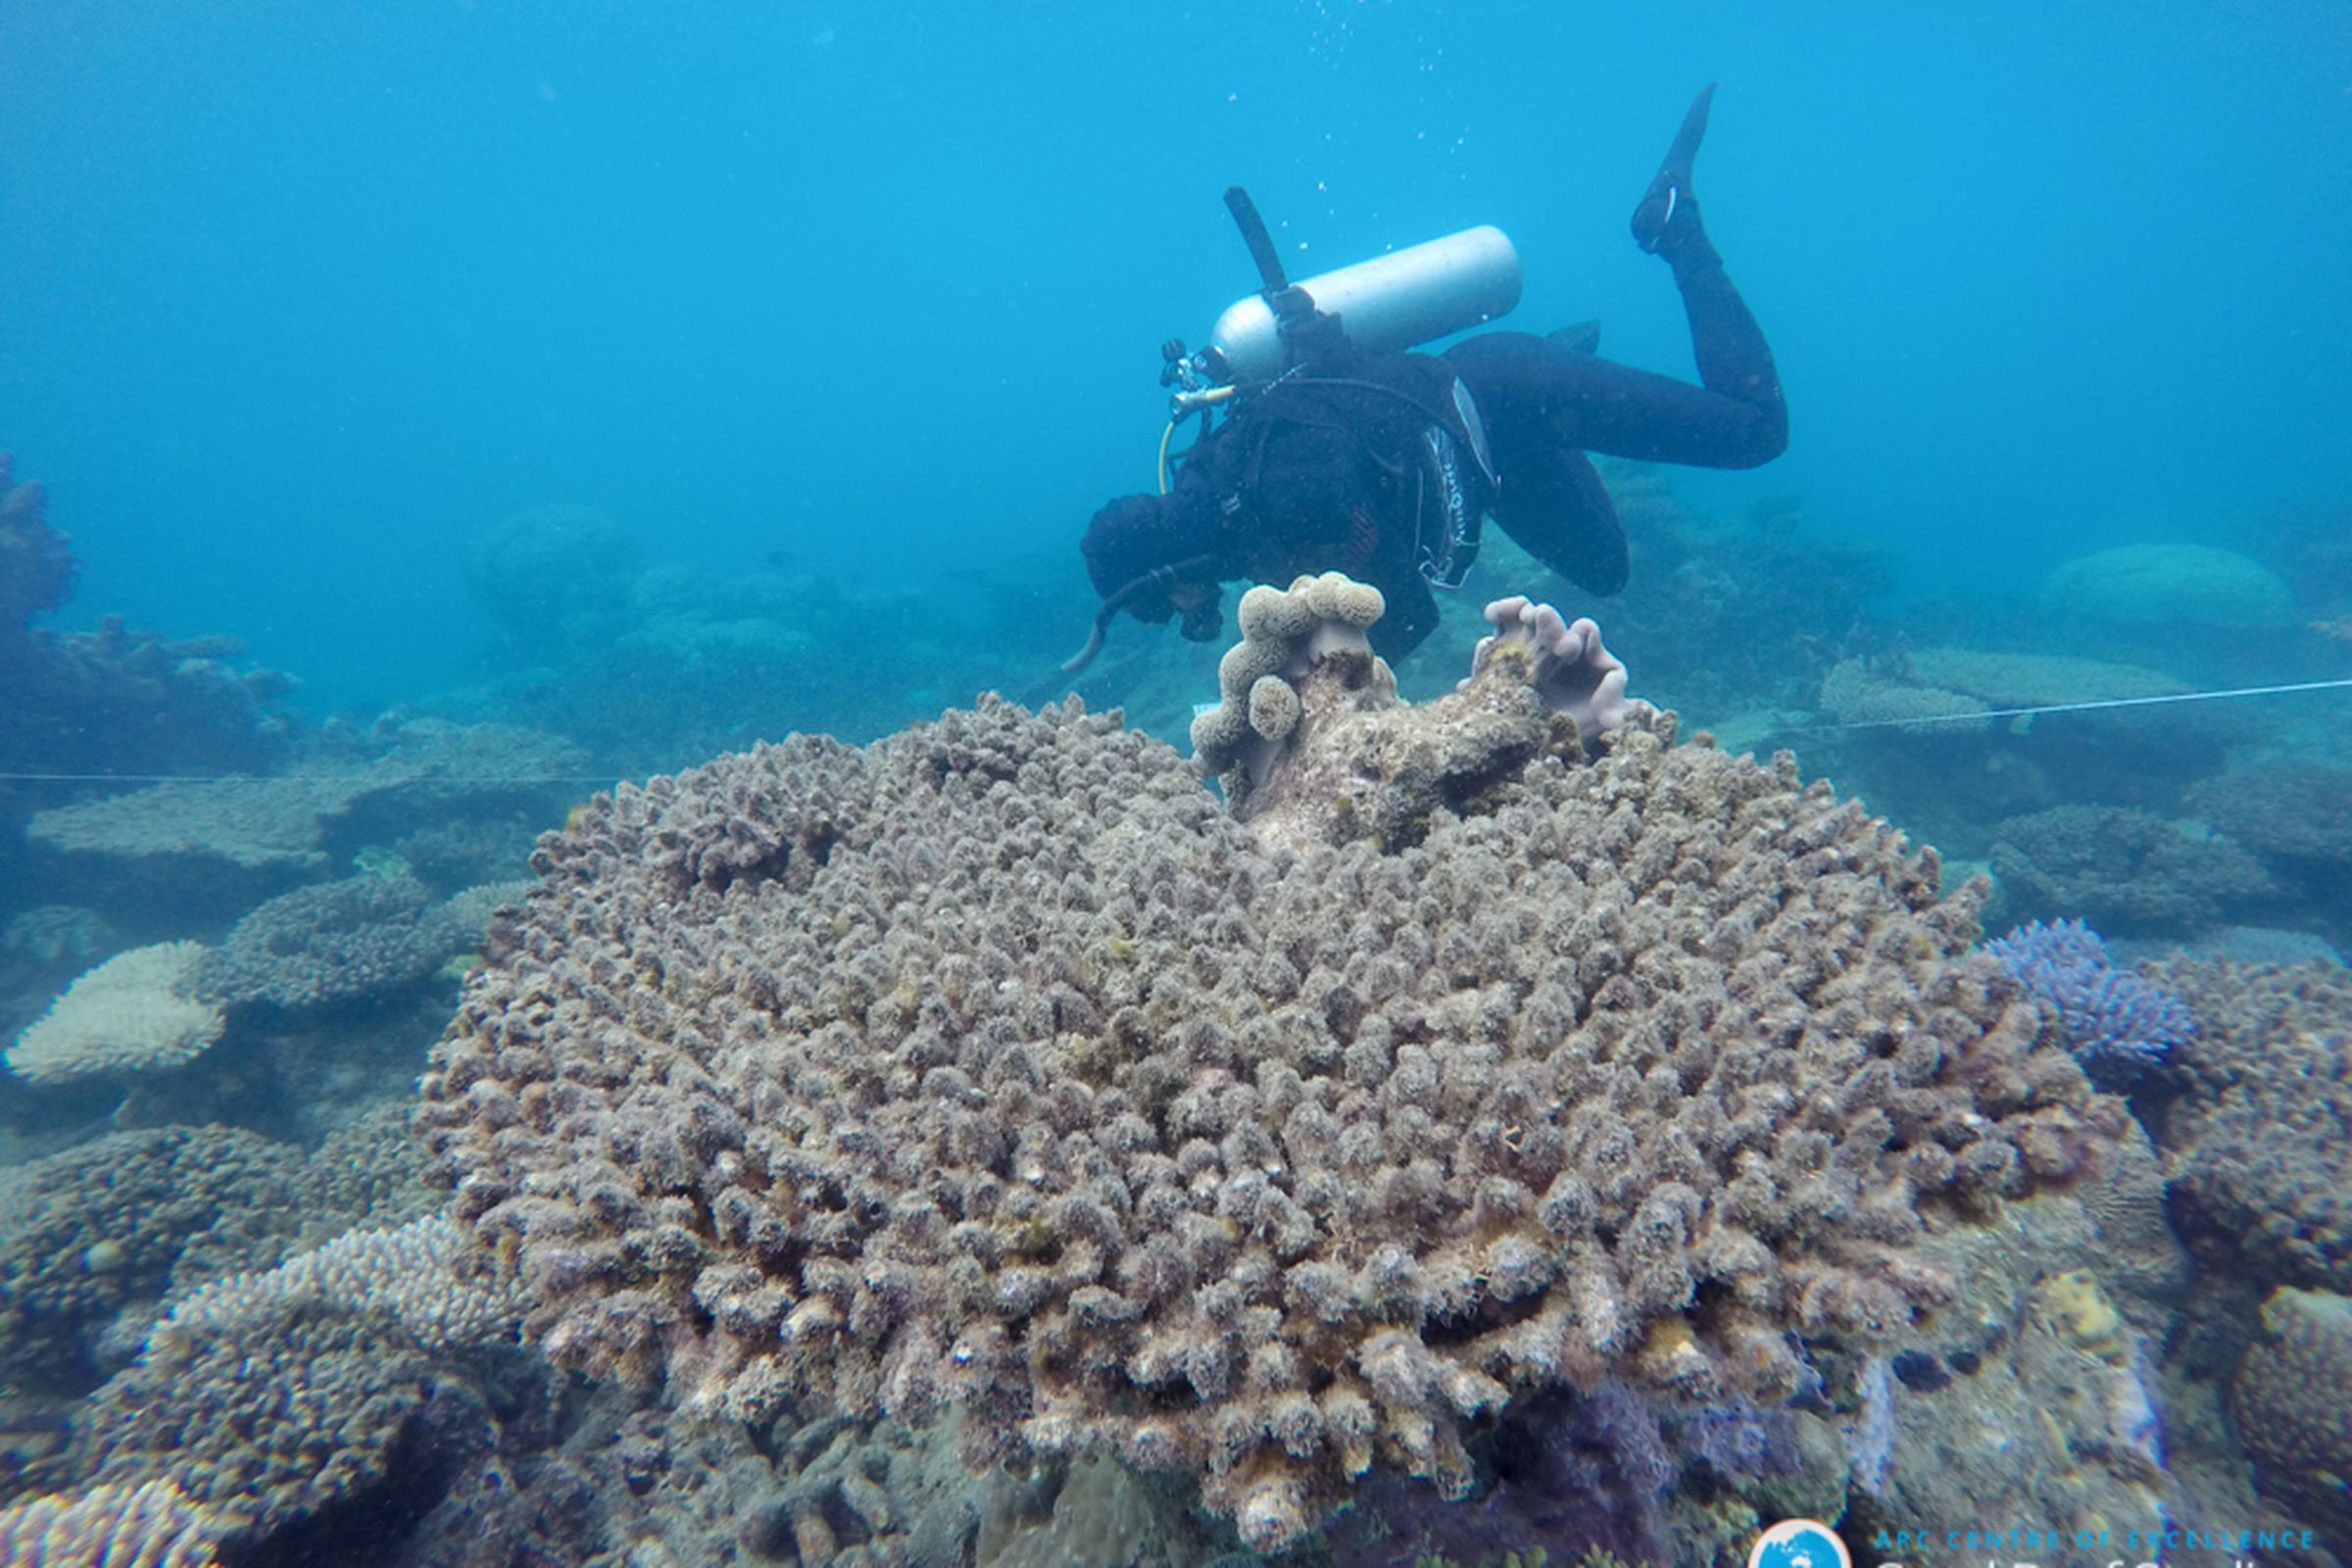 A researcher from the ARC Centre of Excellence for Coral Reef Studies surveys the bleached/dead corals at Zenith Reef, in November 2016.